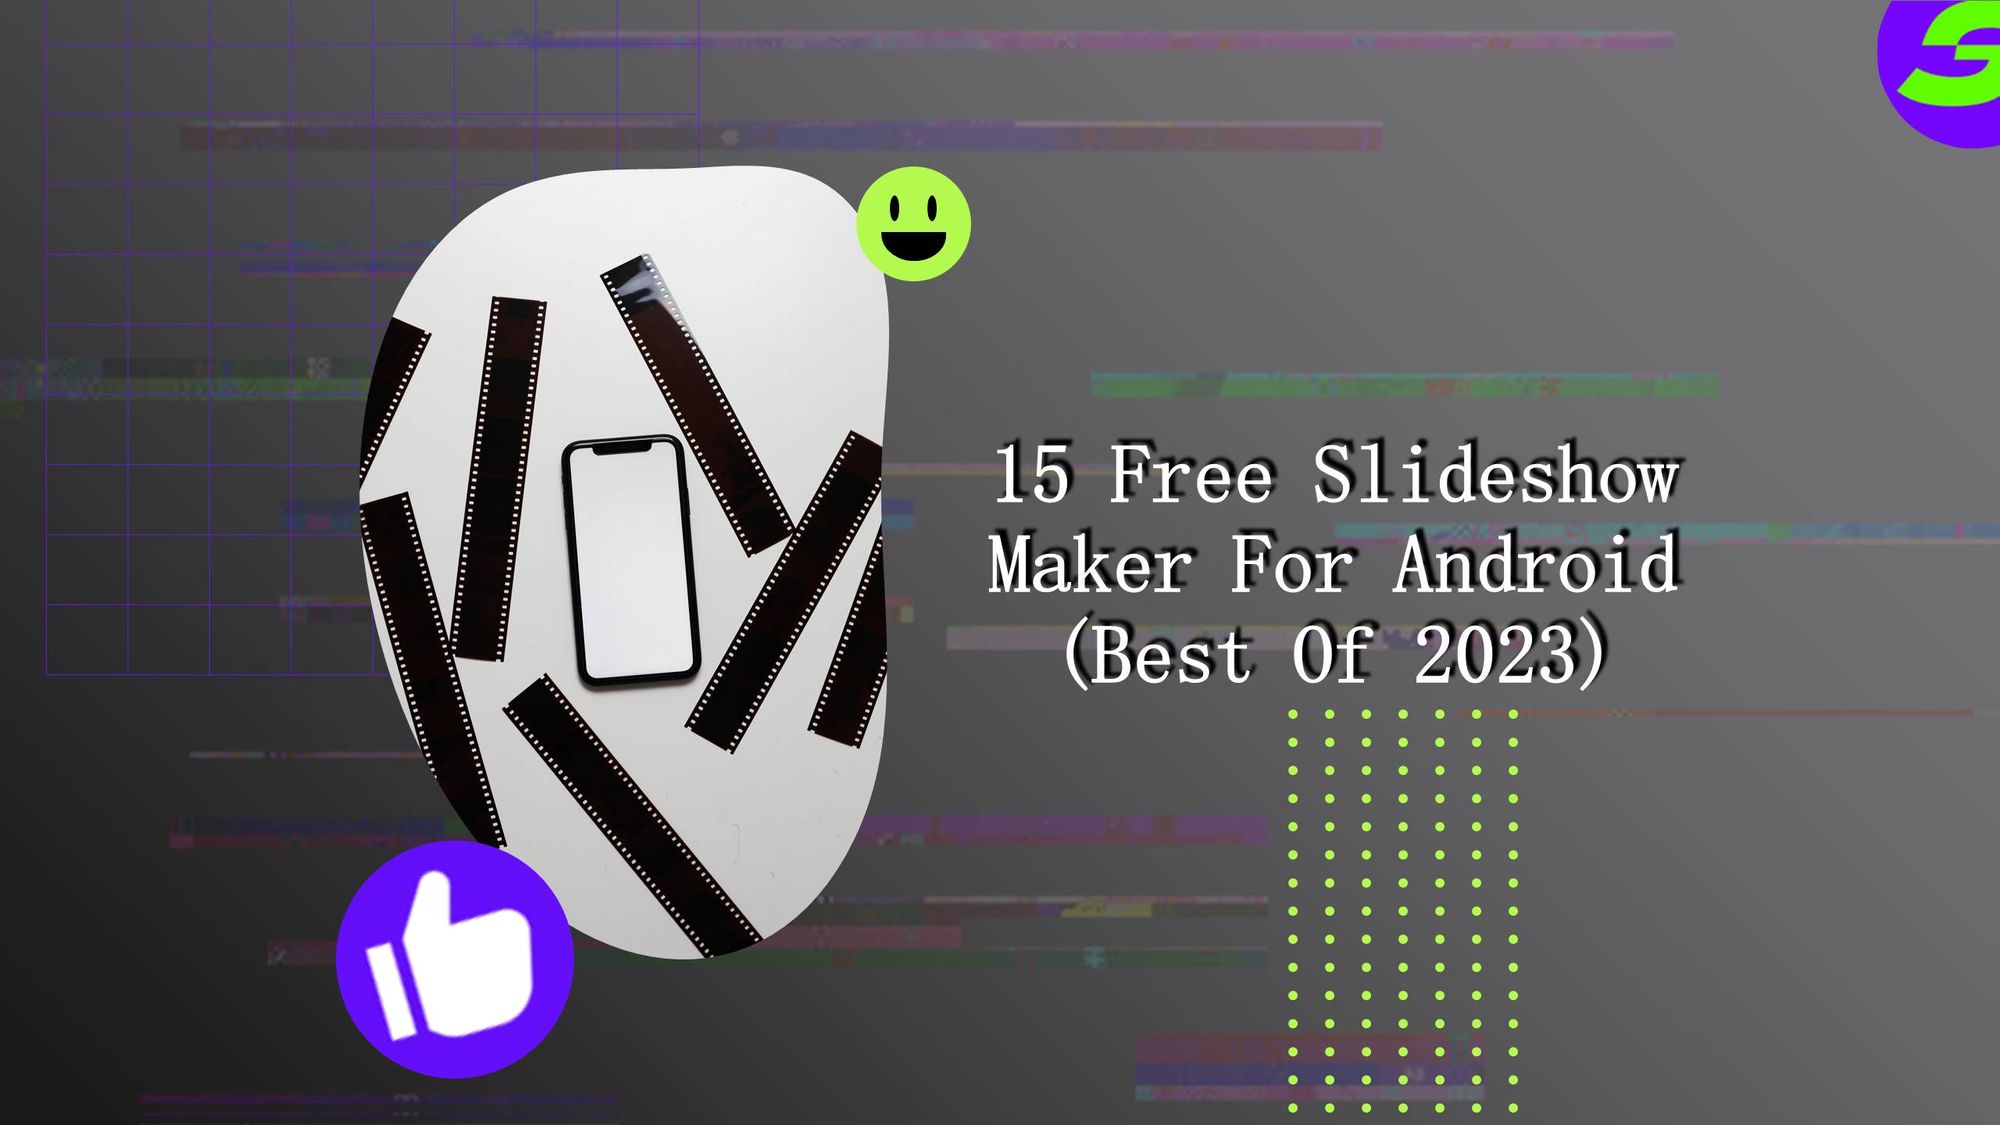 Best Free Slideshow Maker For Android Phone 2023